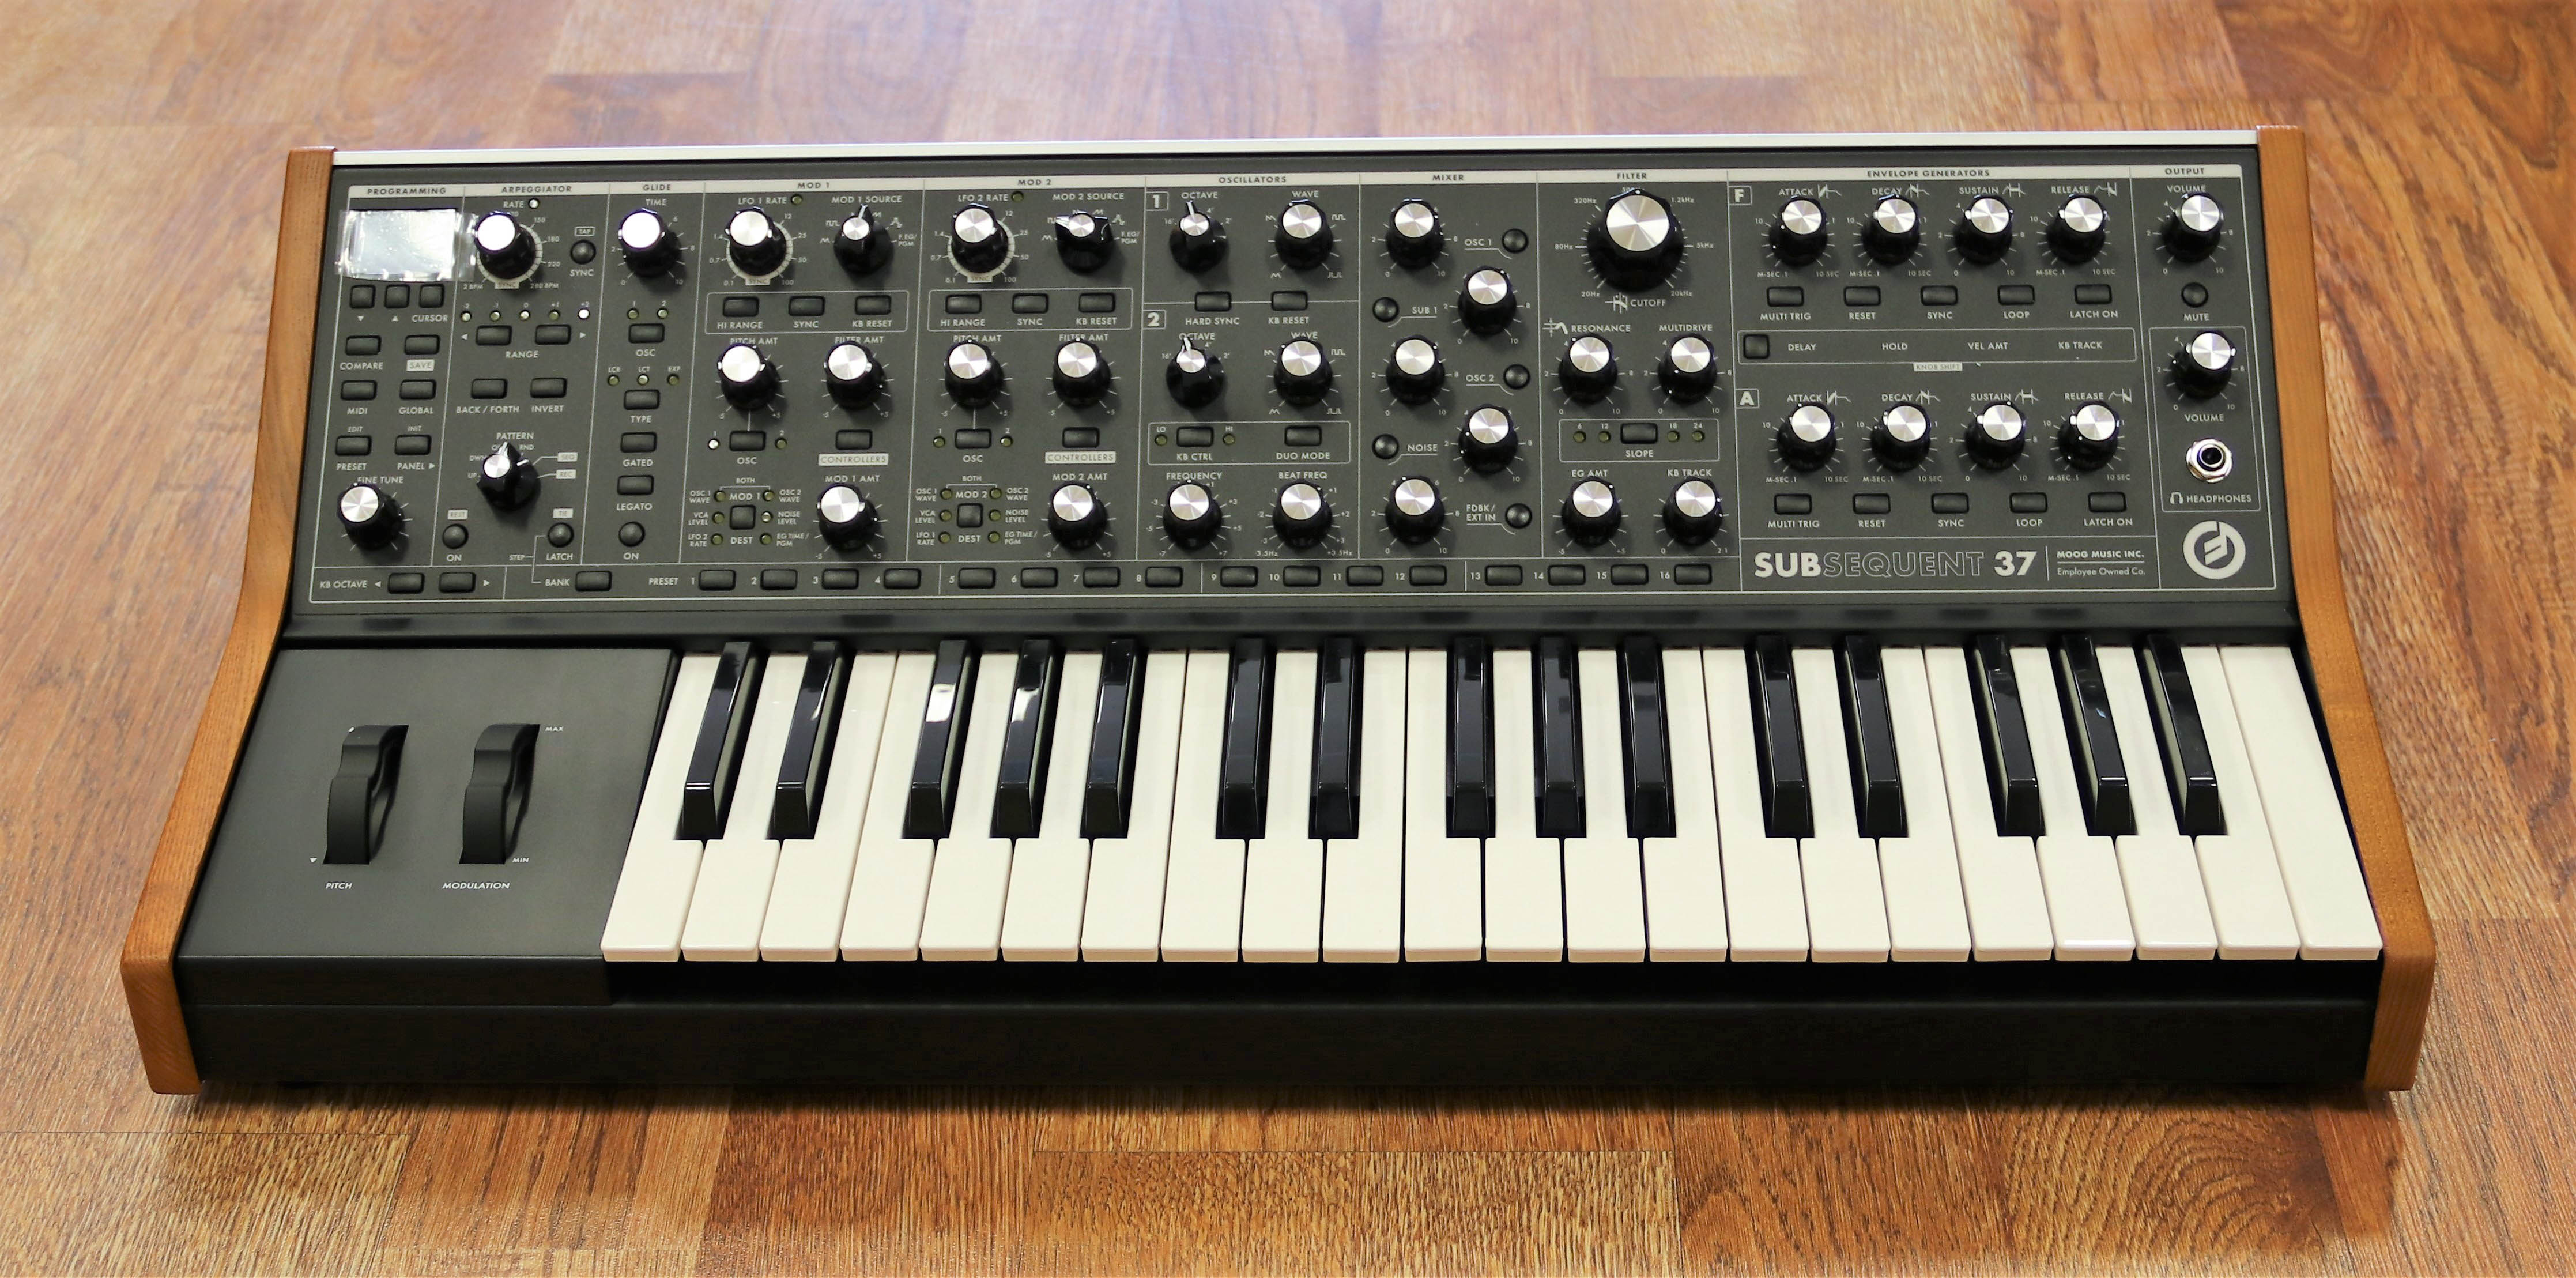 ::Moog Subsequent 37 Analog Synthesizer